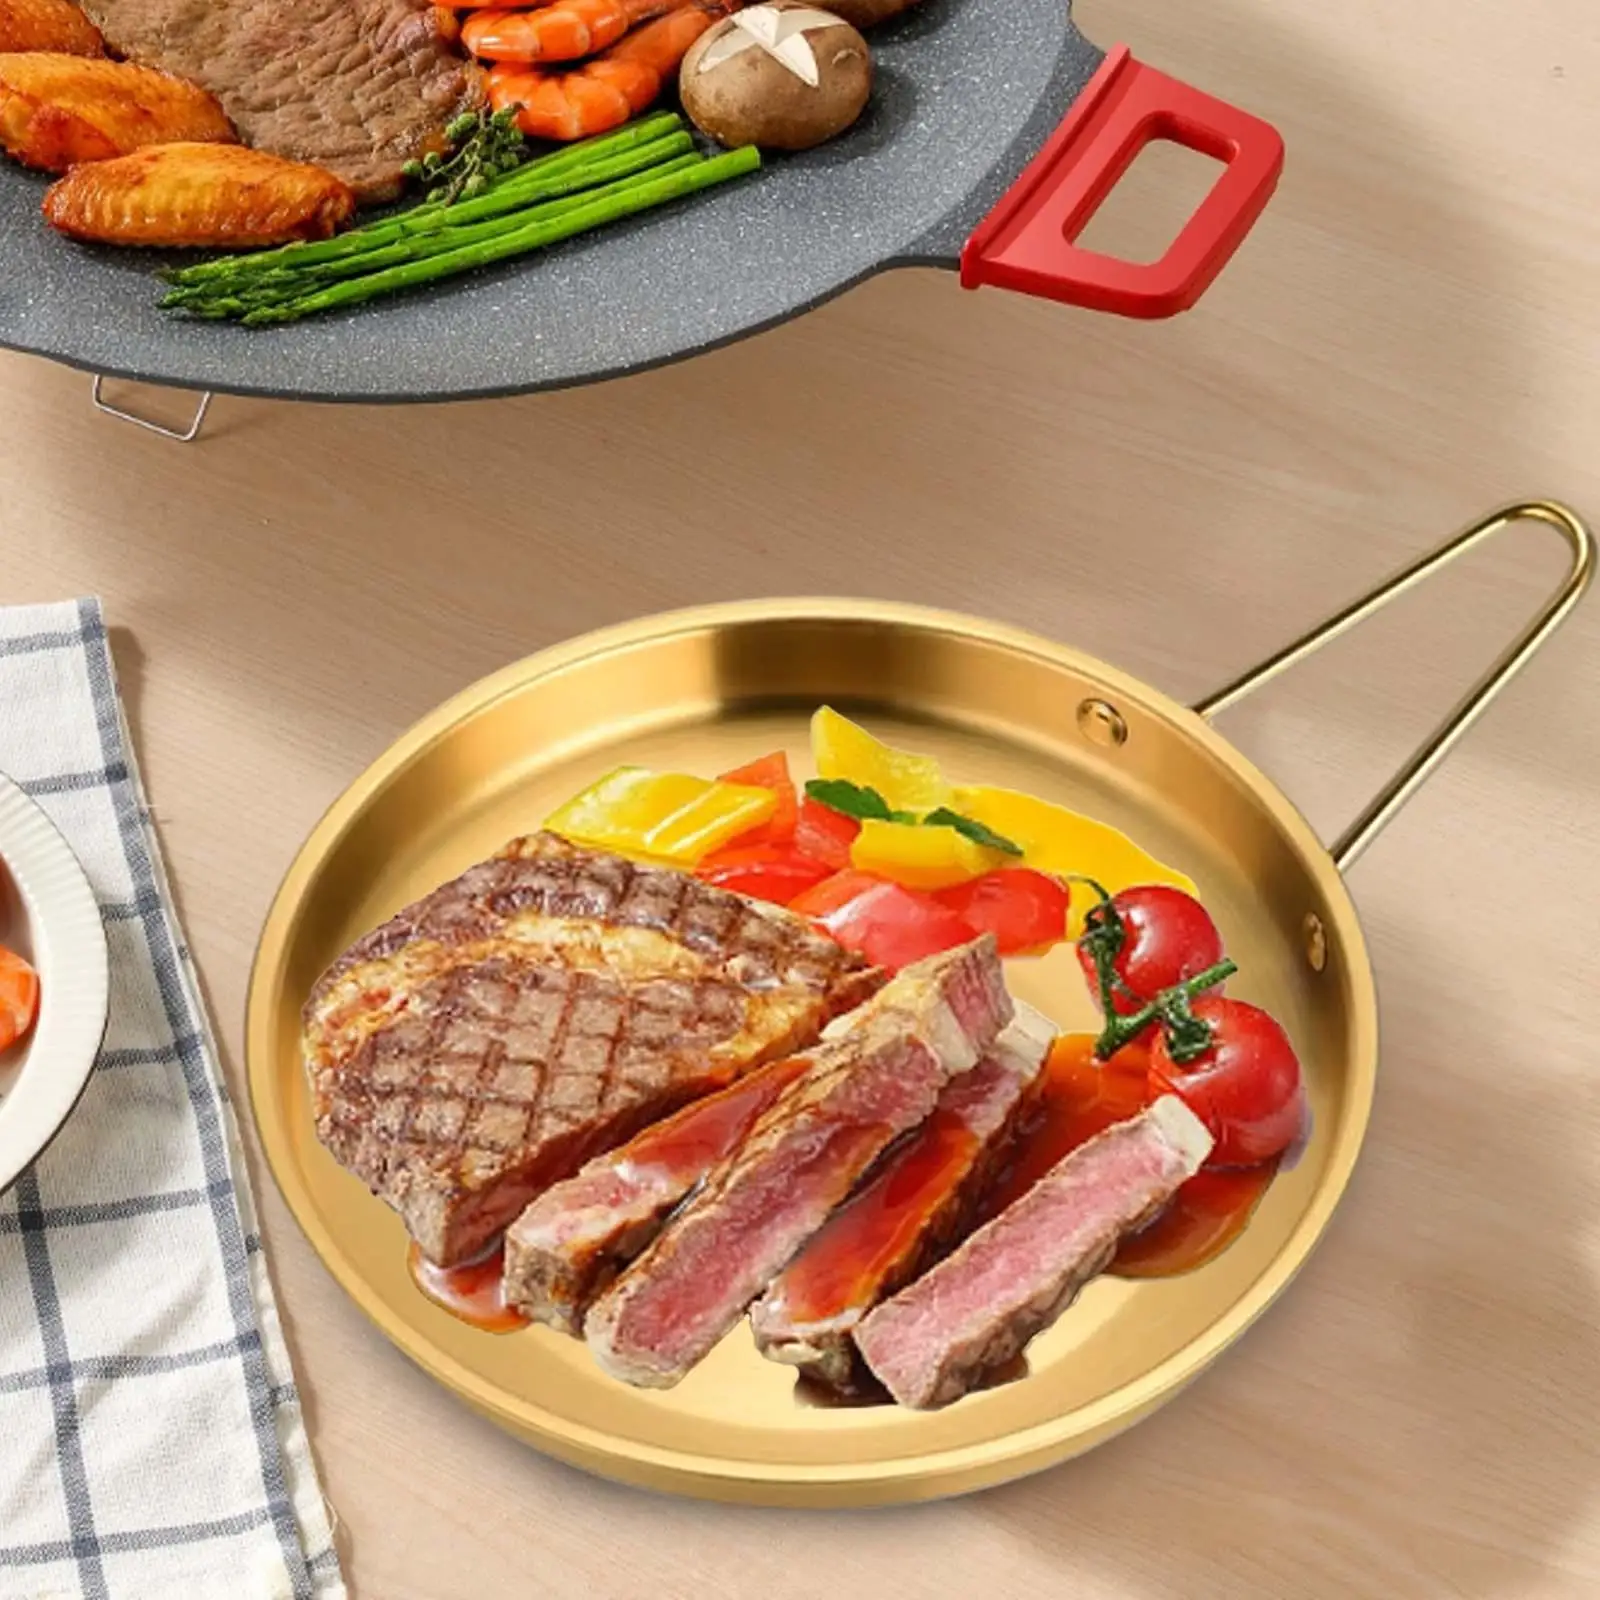 Serving Tray Steak Plate Food Storage Steak Tray Creative Decorative Serving Plate Dessert Tray for Hotel Coffee Bar Camping